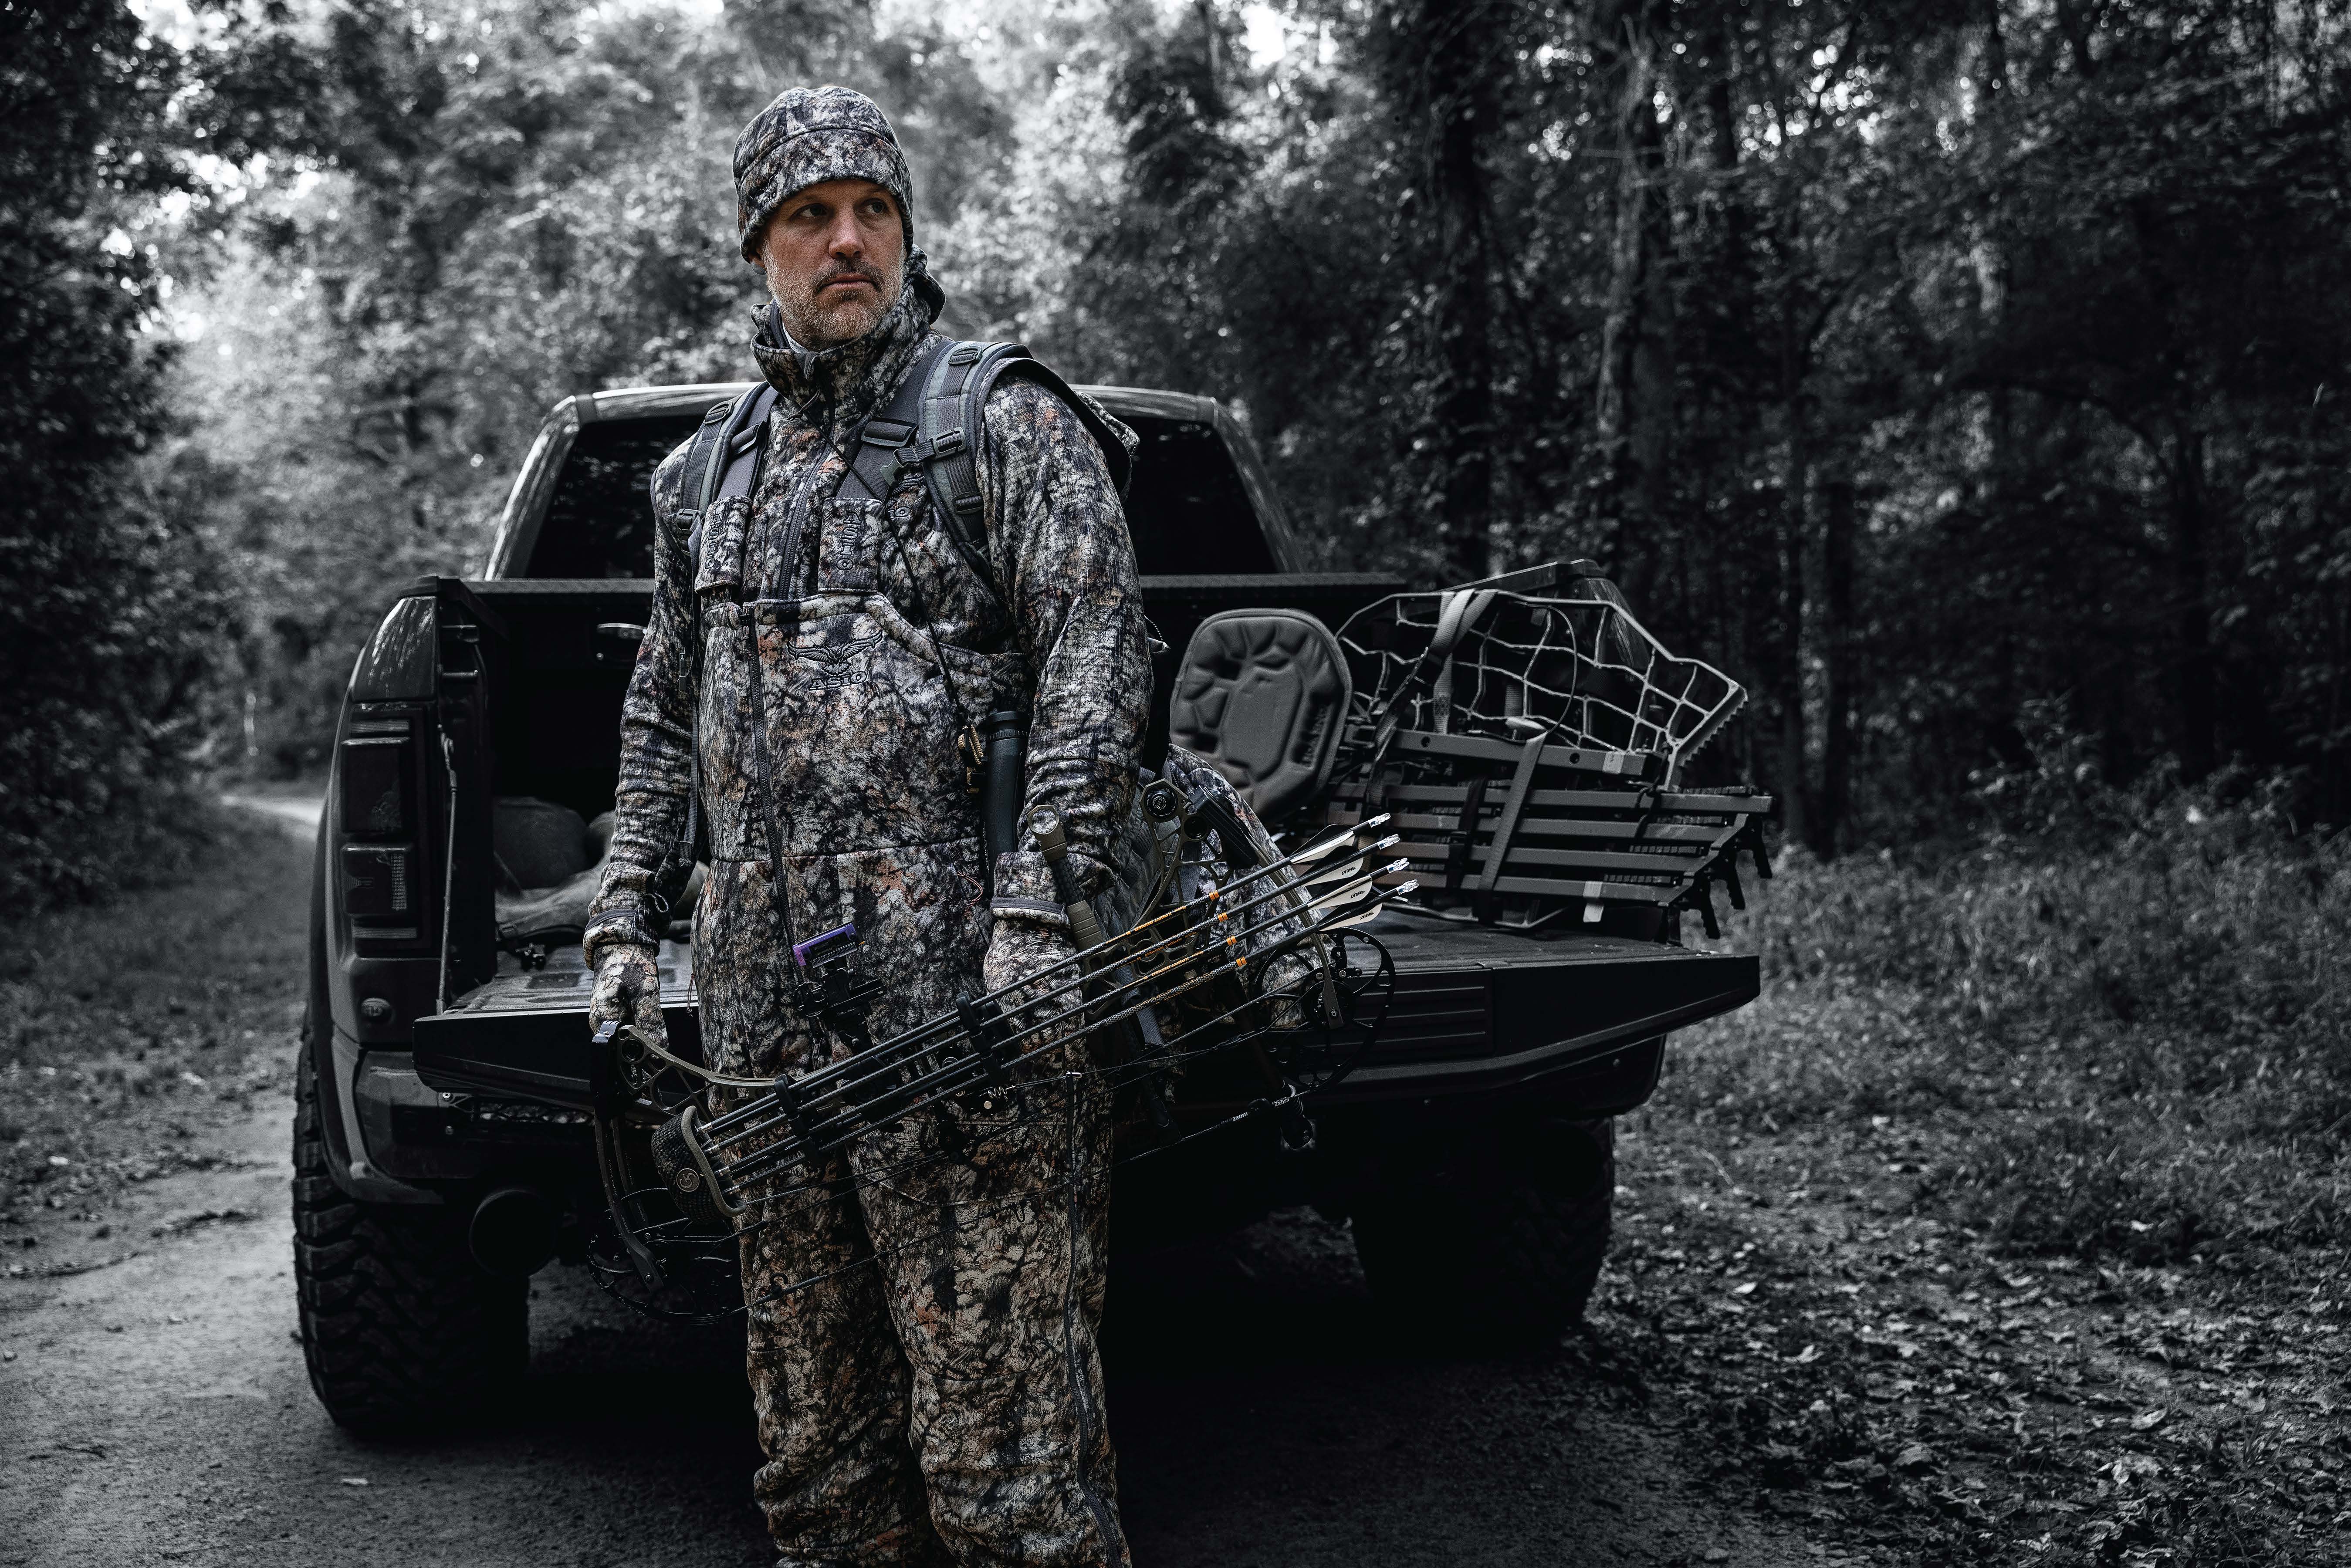 PART 2: Introducing Mission Whitetail: Exploring the depths of Preparation, Planning, &amp; Strategy